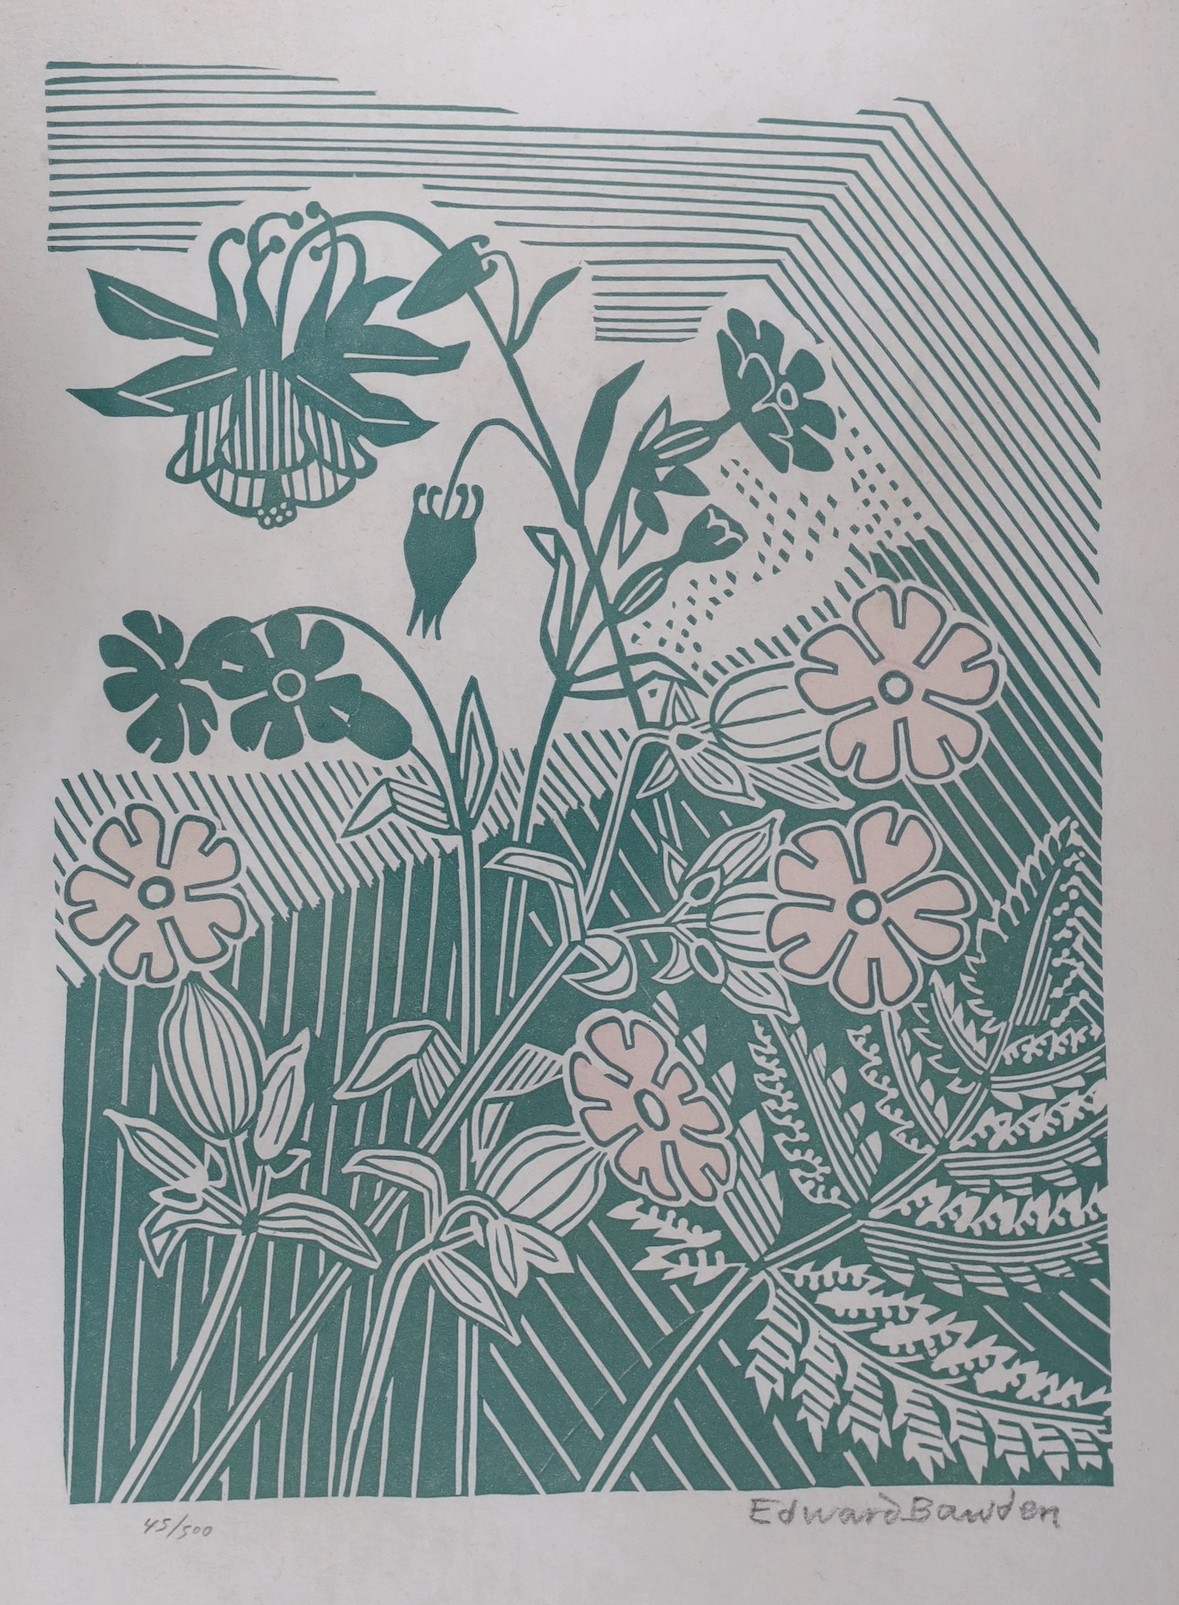 Edward Bawden (1903-1989), limited edition print, Field Flowers, signed in pencil, 45/500, overall 28 x 20cm